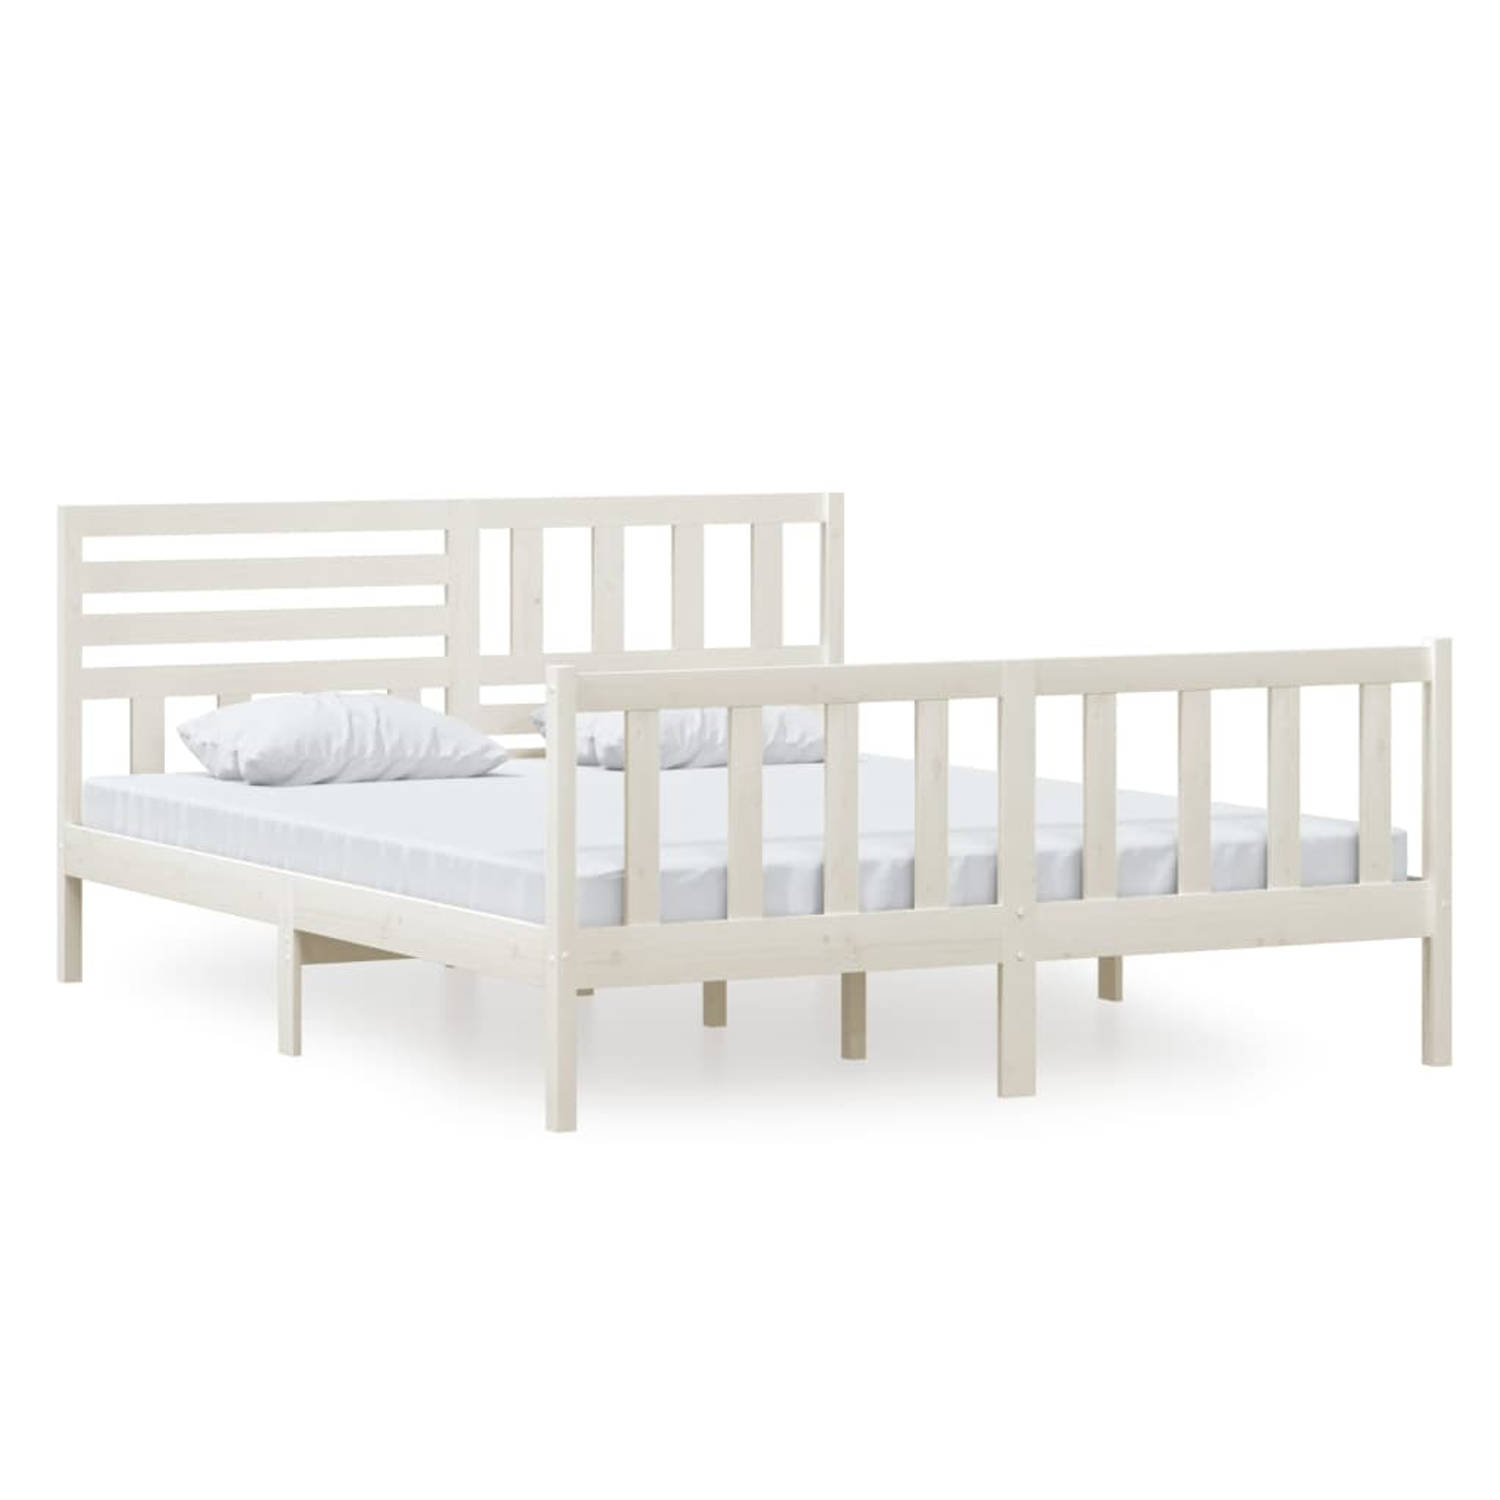 The Living Store Bedframe massief hout wit 160x200 cm - Bedframe - Bedframes - Tweepersoonsbed - Bed - Bedombouw - Dubbel Bed - Frame - Bed Frame - Ledikant - Bedframe Met Hoofdein